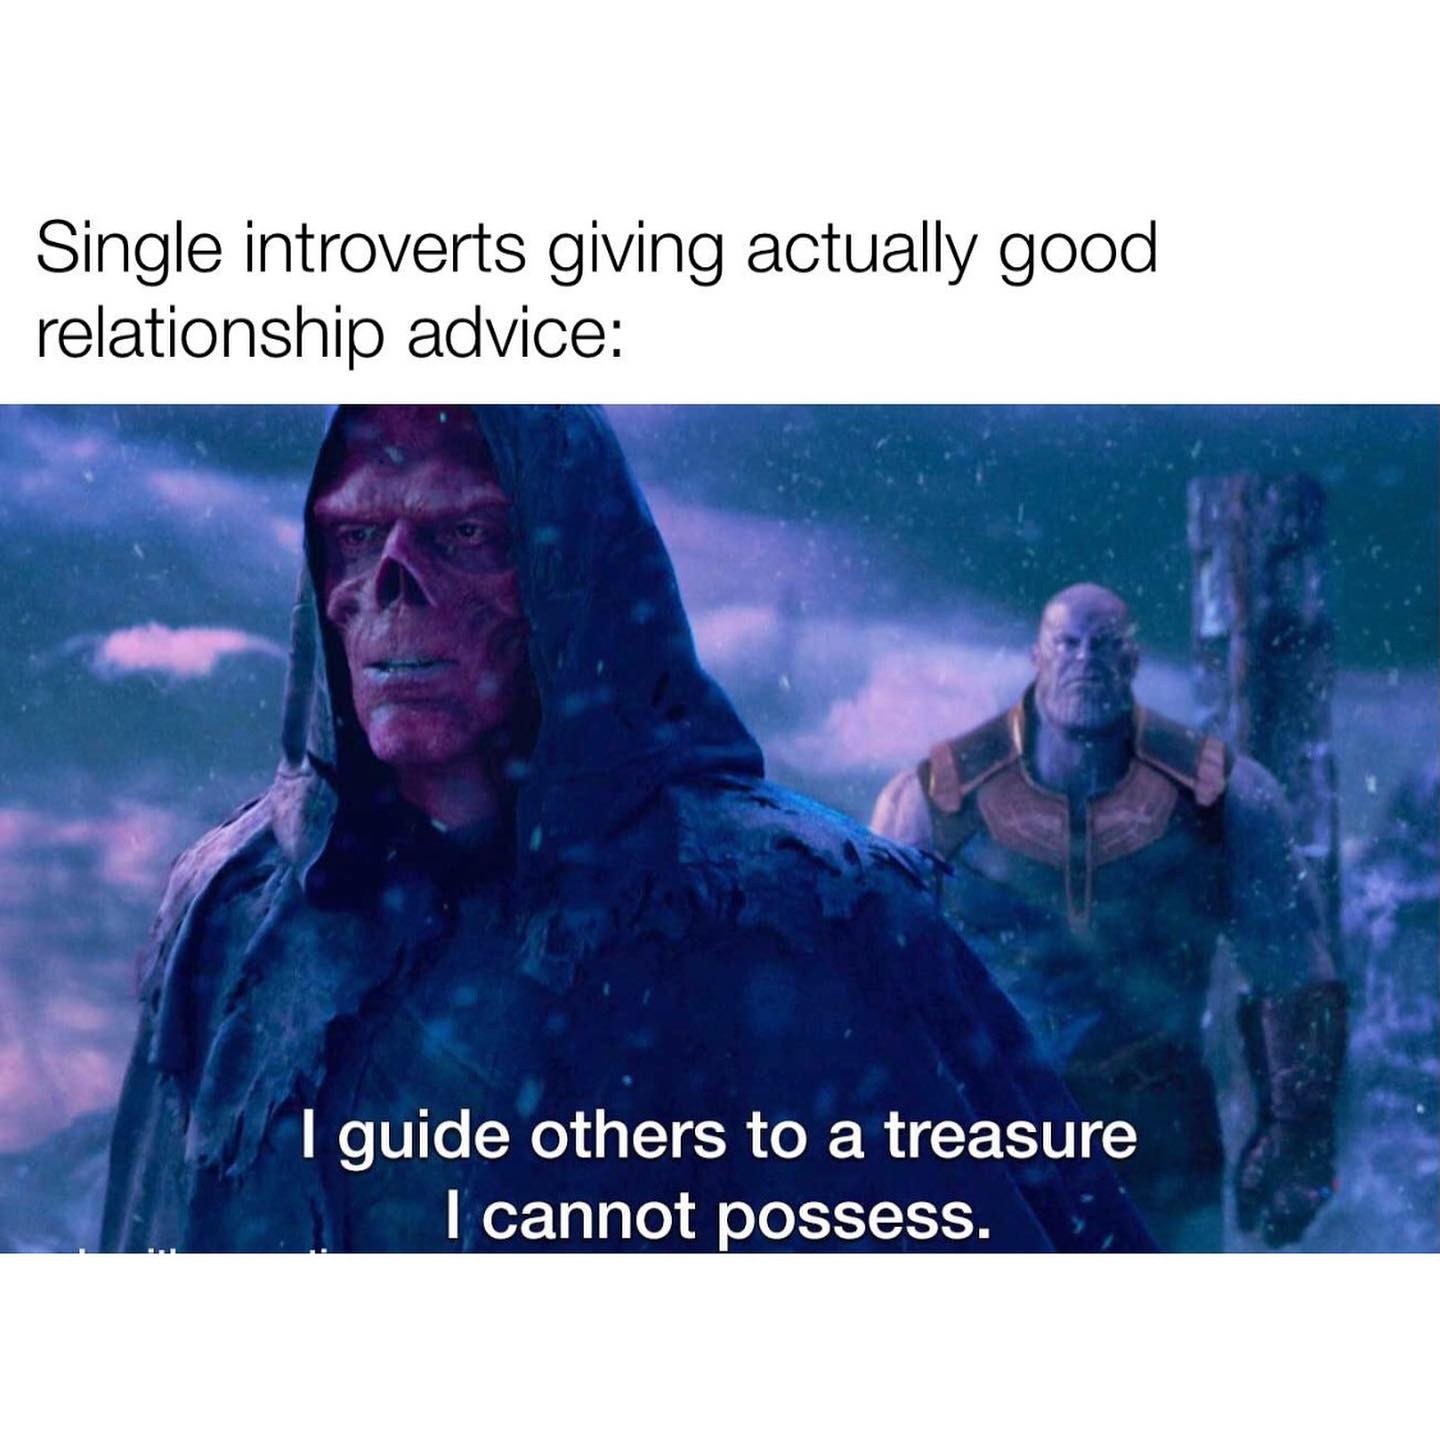 Single introverts giving actually good relationship advice: I guide others to a treasure I cannot possess.